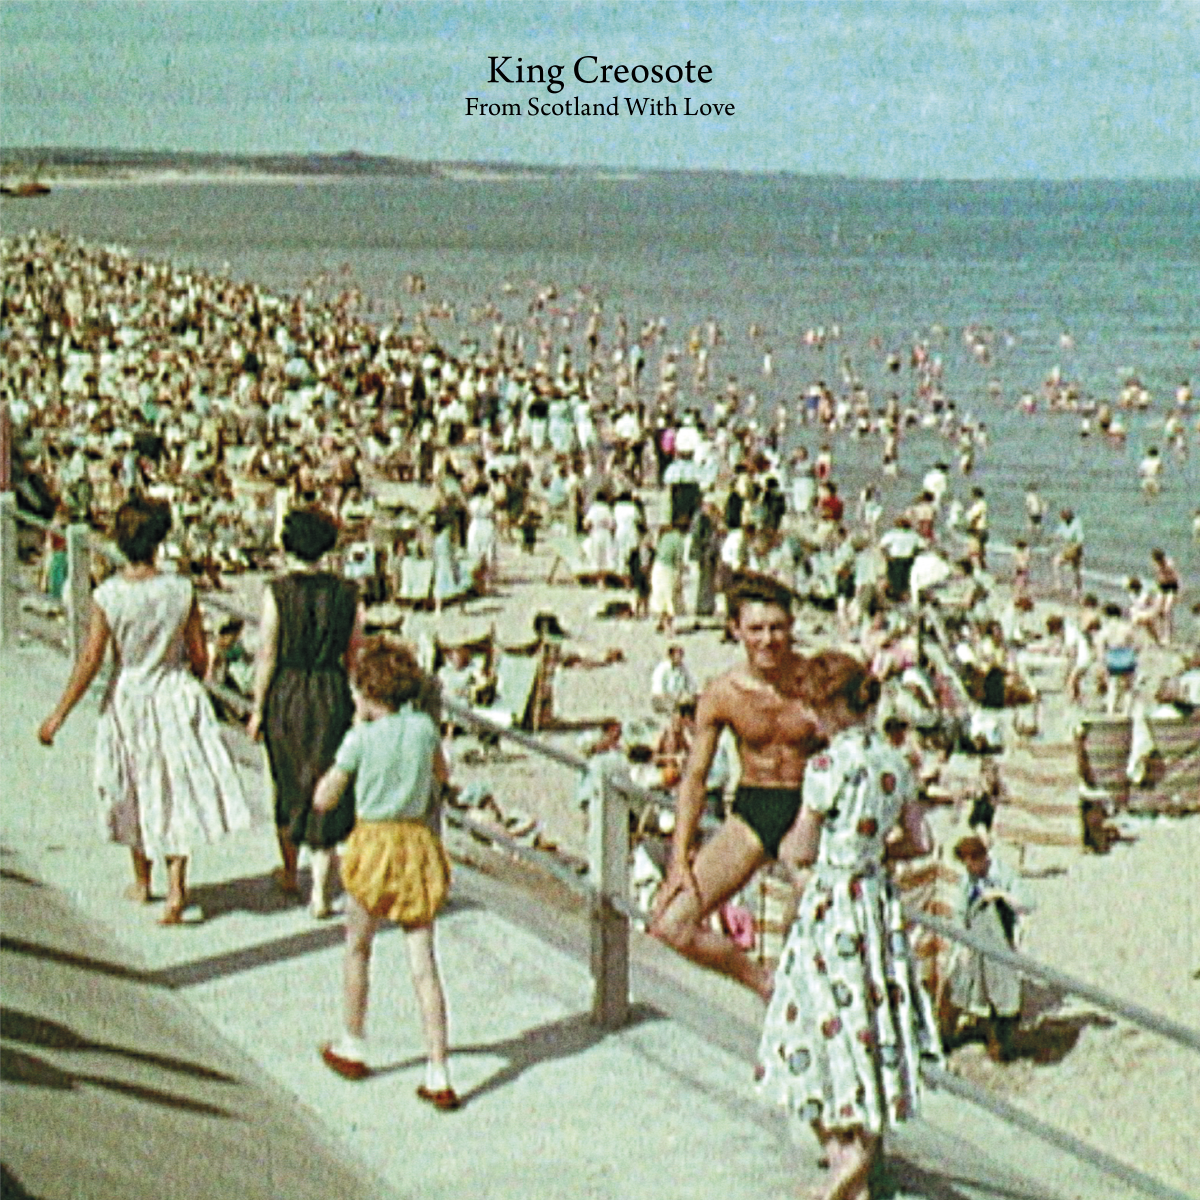 King Creosote – From Scotland With Love